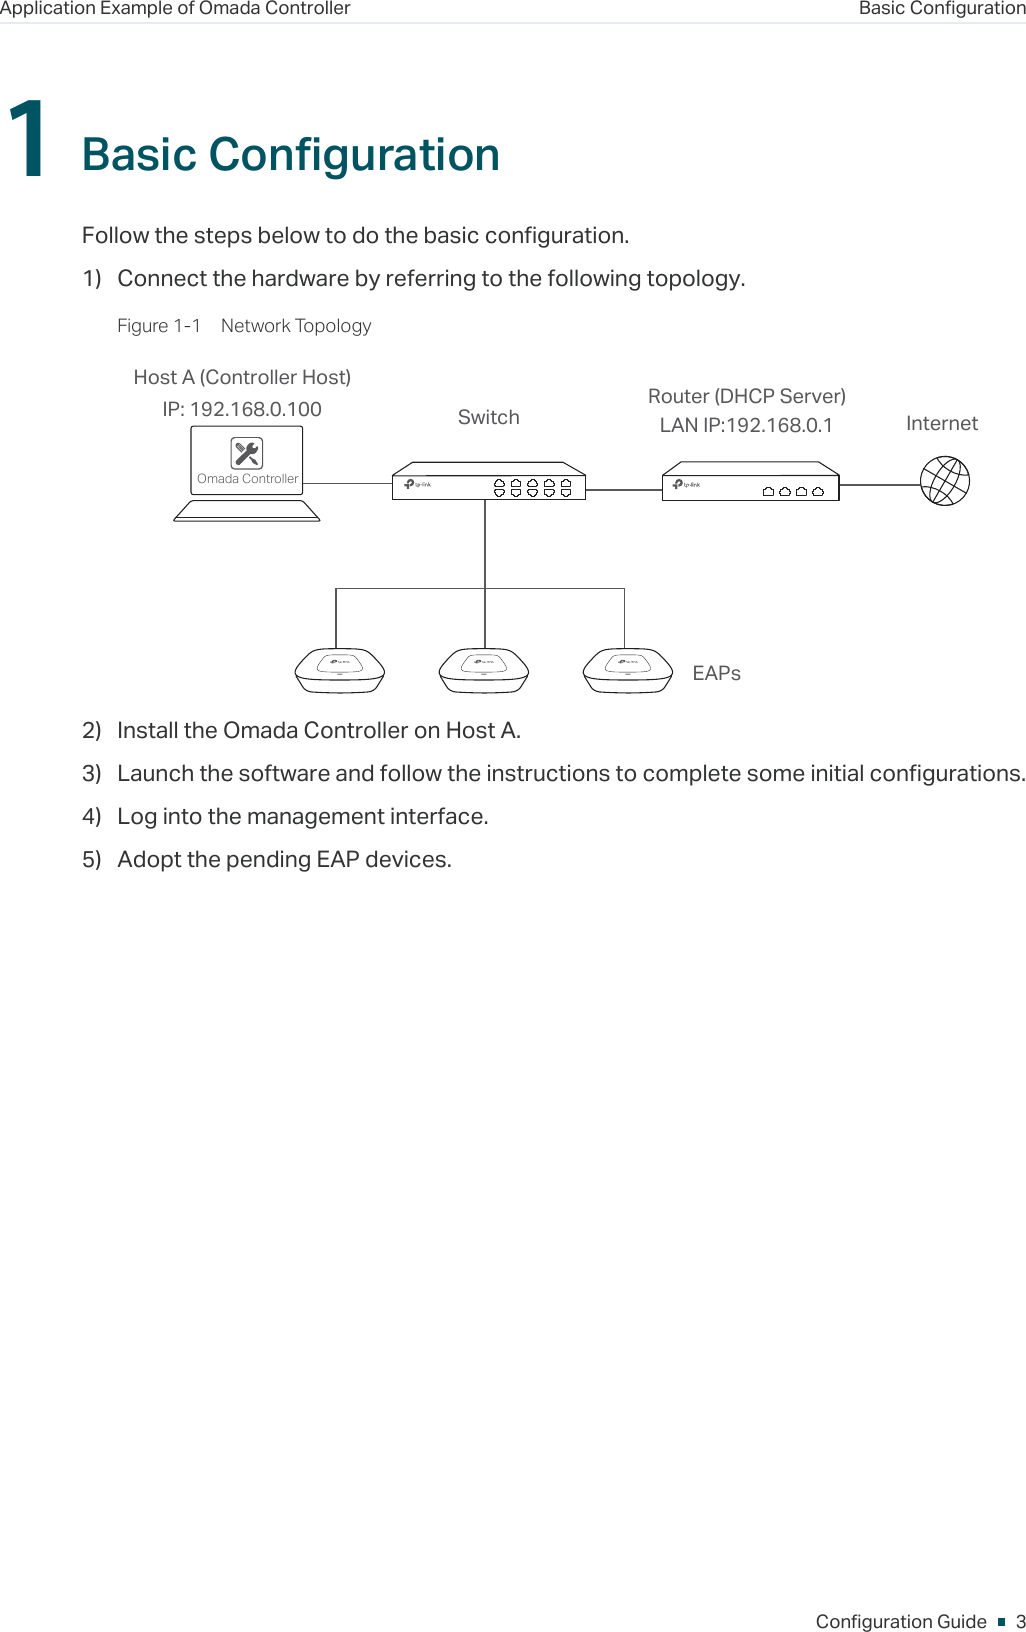 Page 3 of 9 - Application Example Of Omada Controller